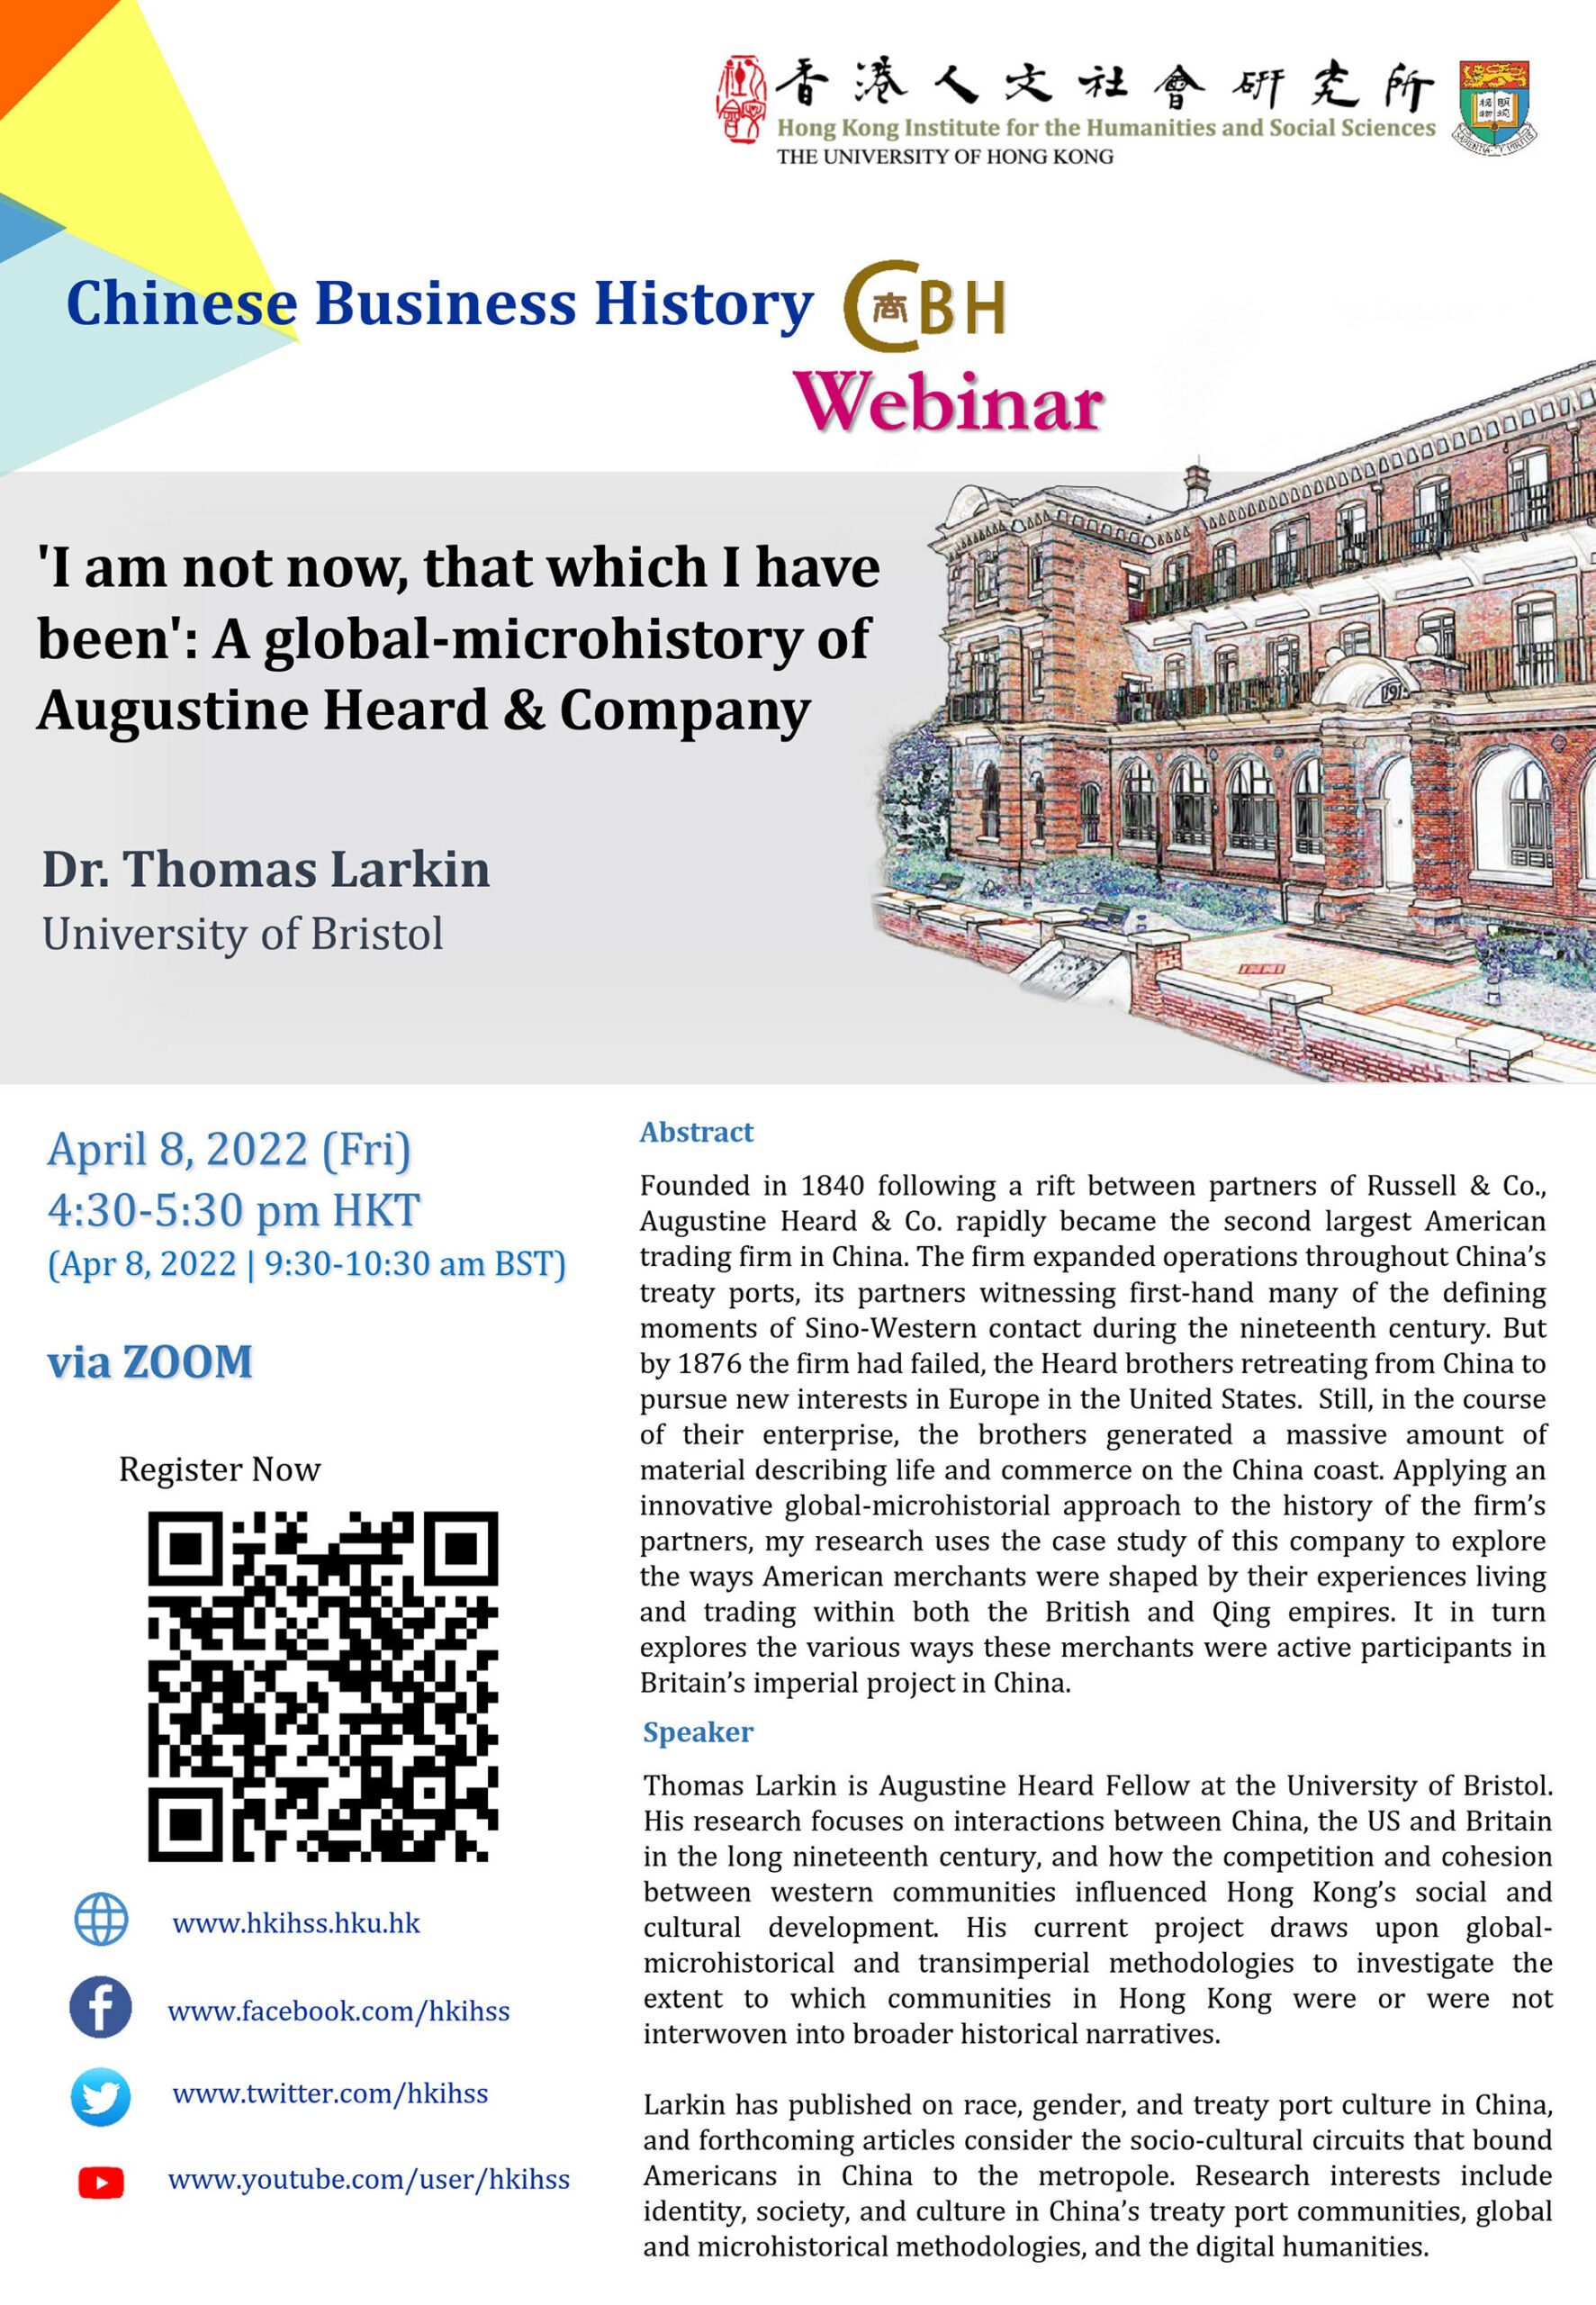 Chinese Business History Webinar on “'I am not now, that which I have been': A global-microhistory of Augustine Heard & Company ” by Dr. Thomas Larkin (April 8, 2022)